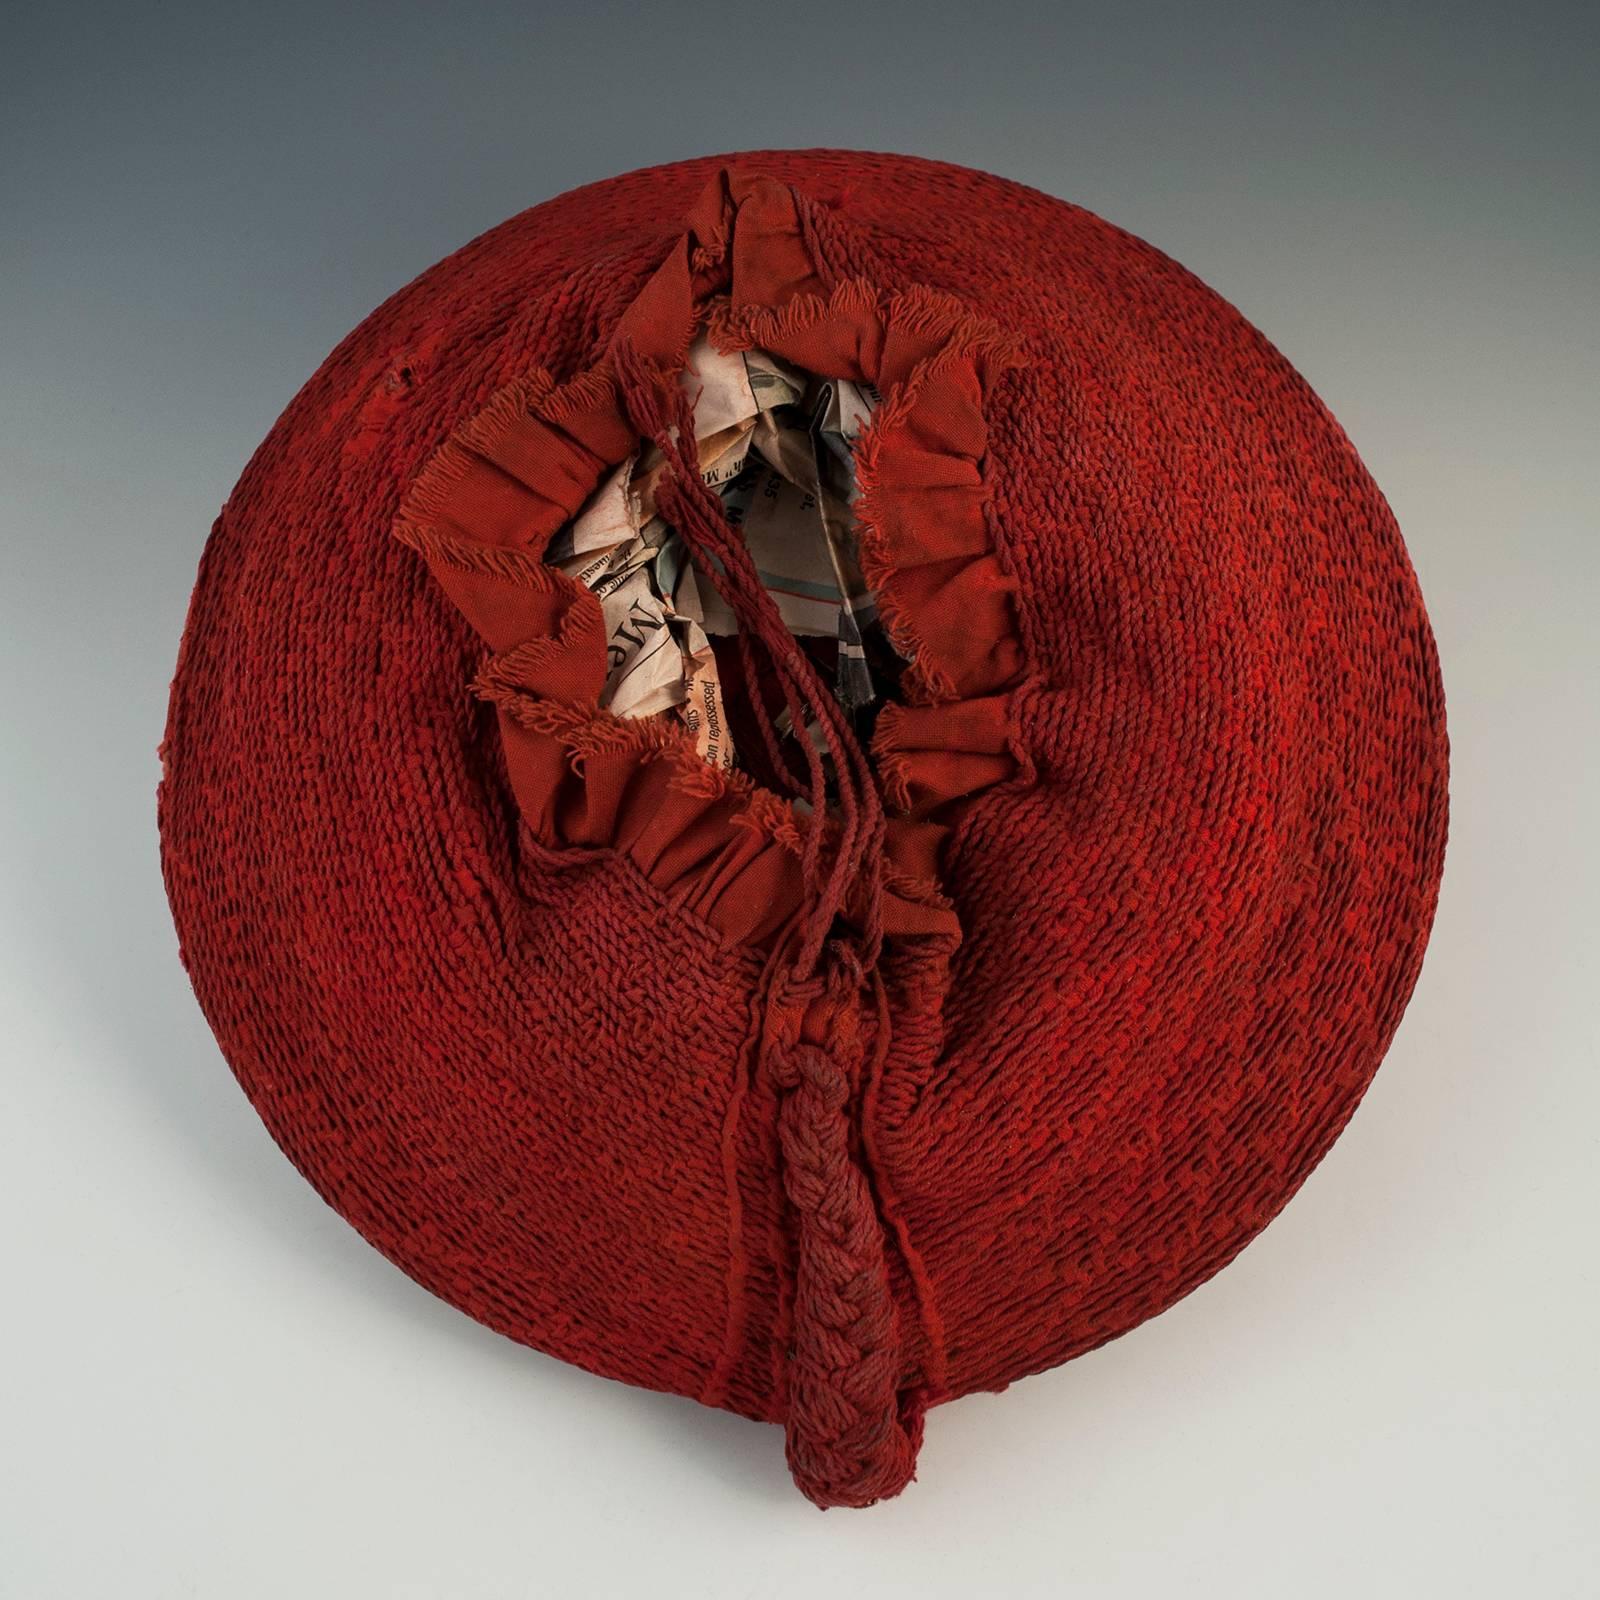 Mid-20th century Tribal Zulu women's woven red cotton hat, Isicholo, from South Africa.

The unusual spiral weave on this cotton Isicholo makes this a beautiful and rare example of the hats worn during special ceremonies by married Zulu women. It